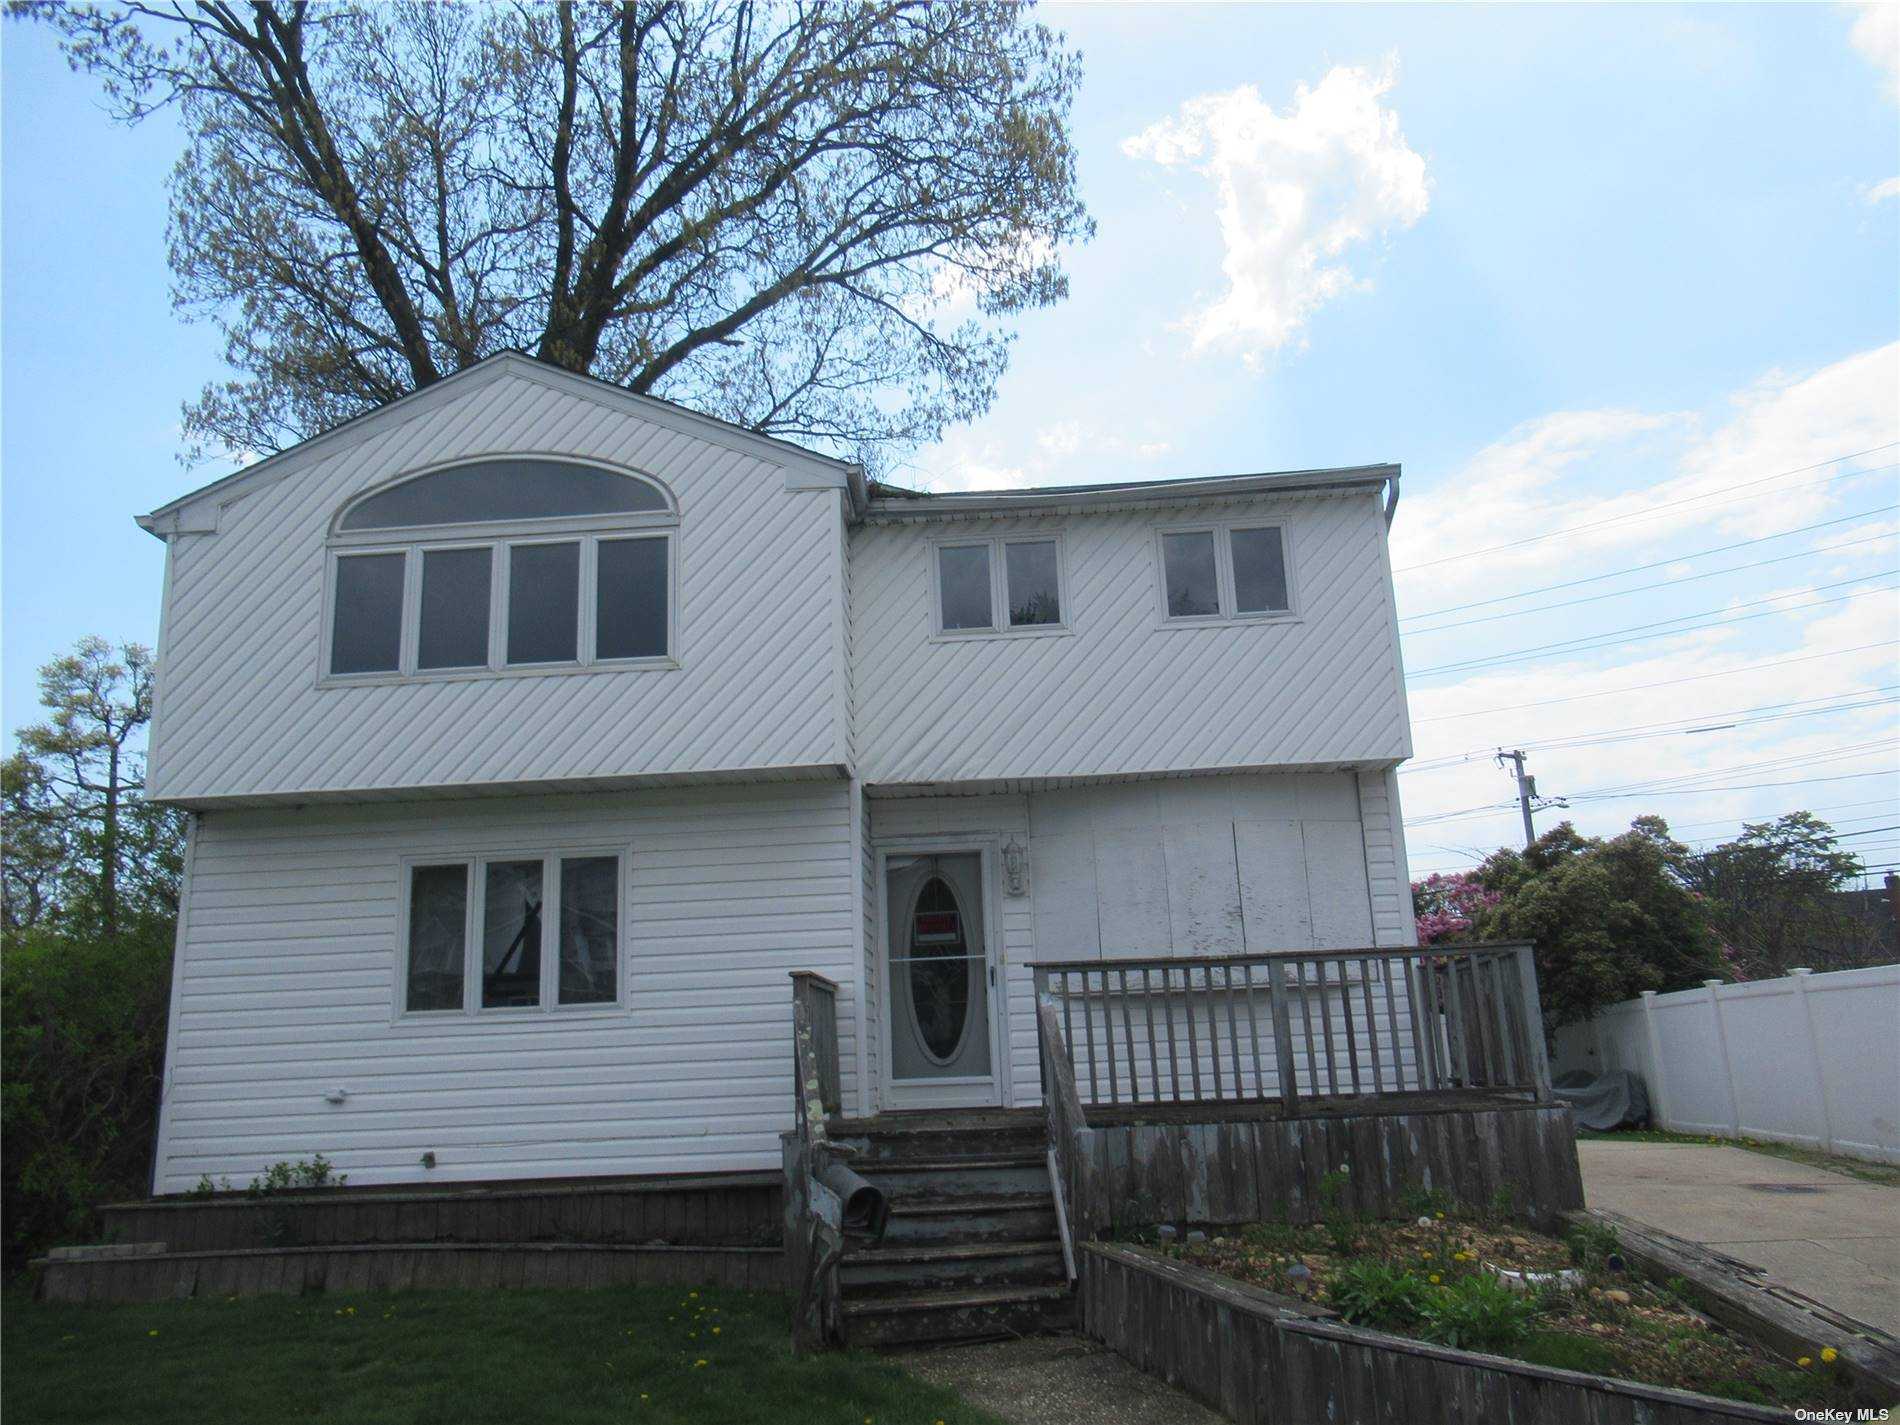 View Bellmore, NY 11710 house